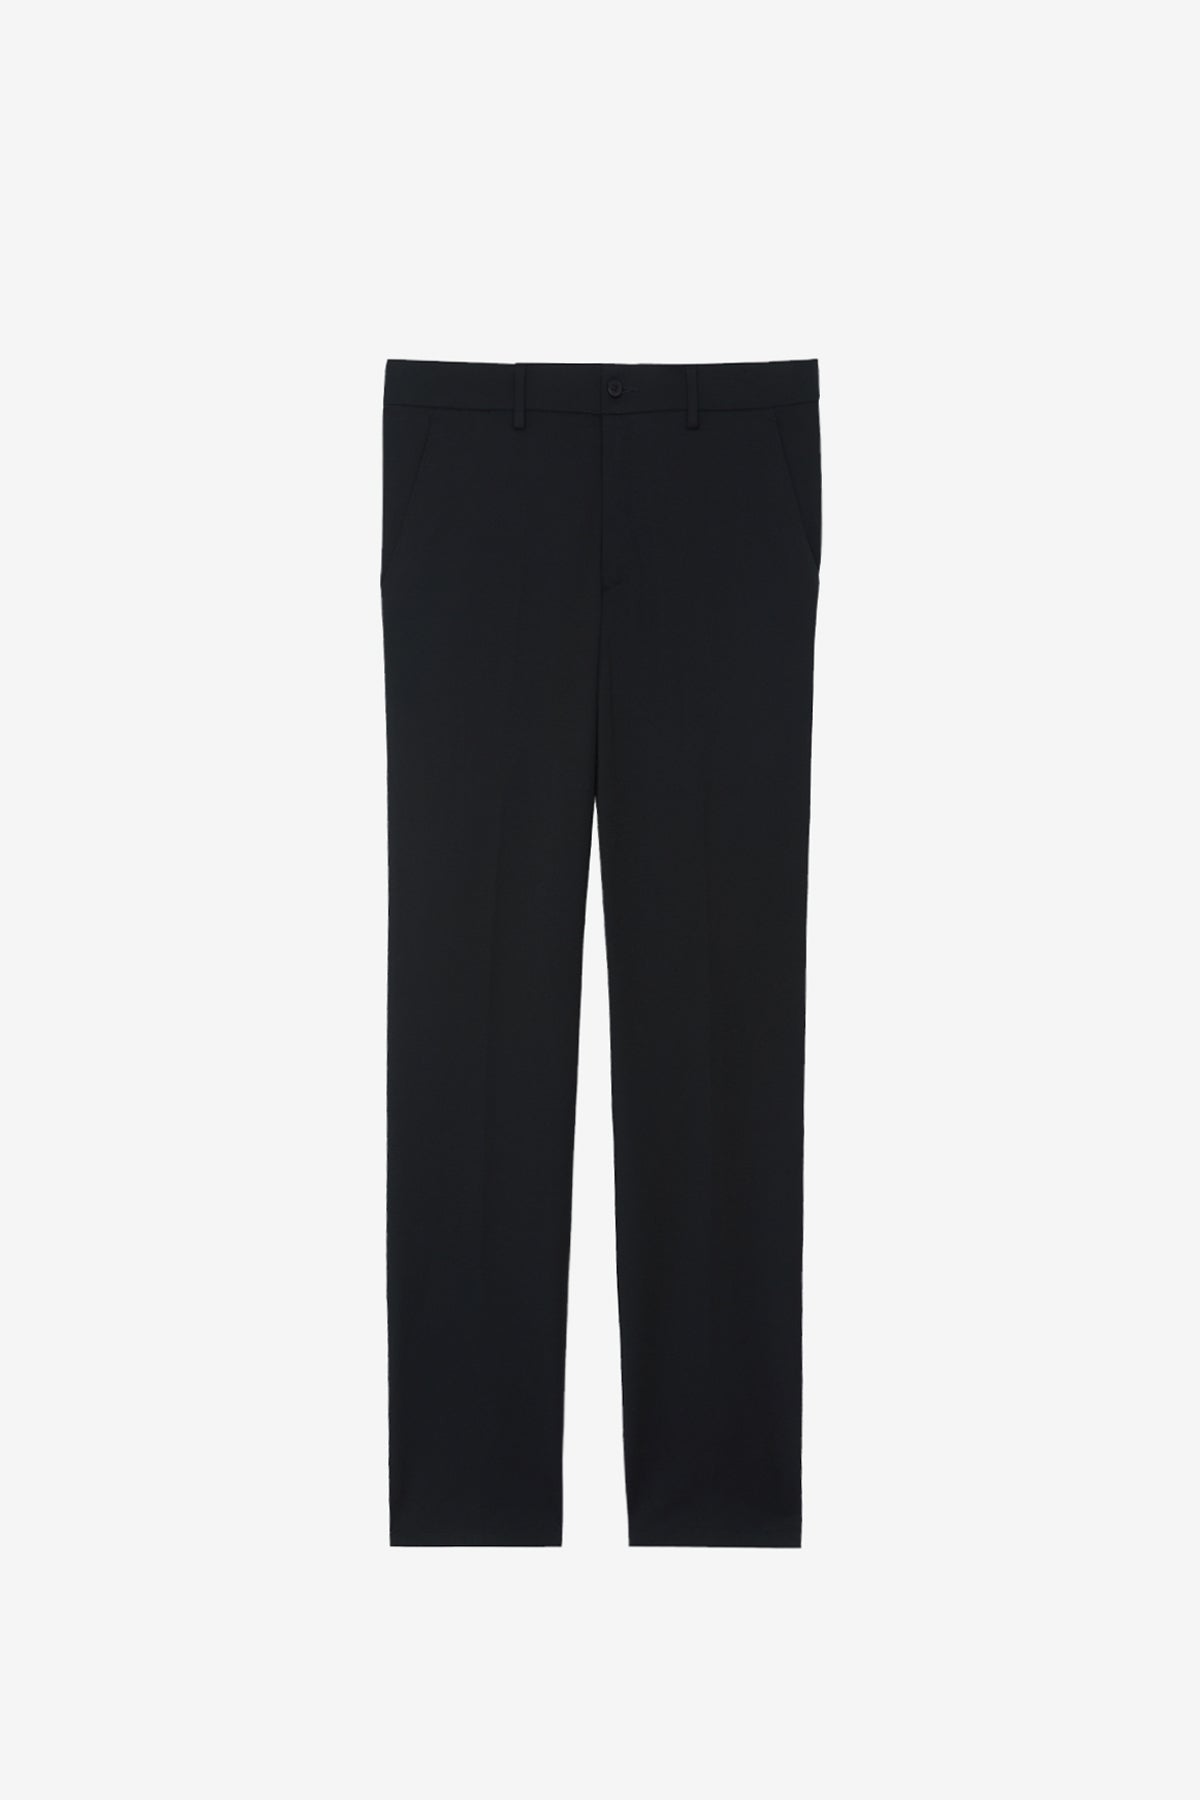 Rome trousers